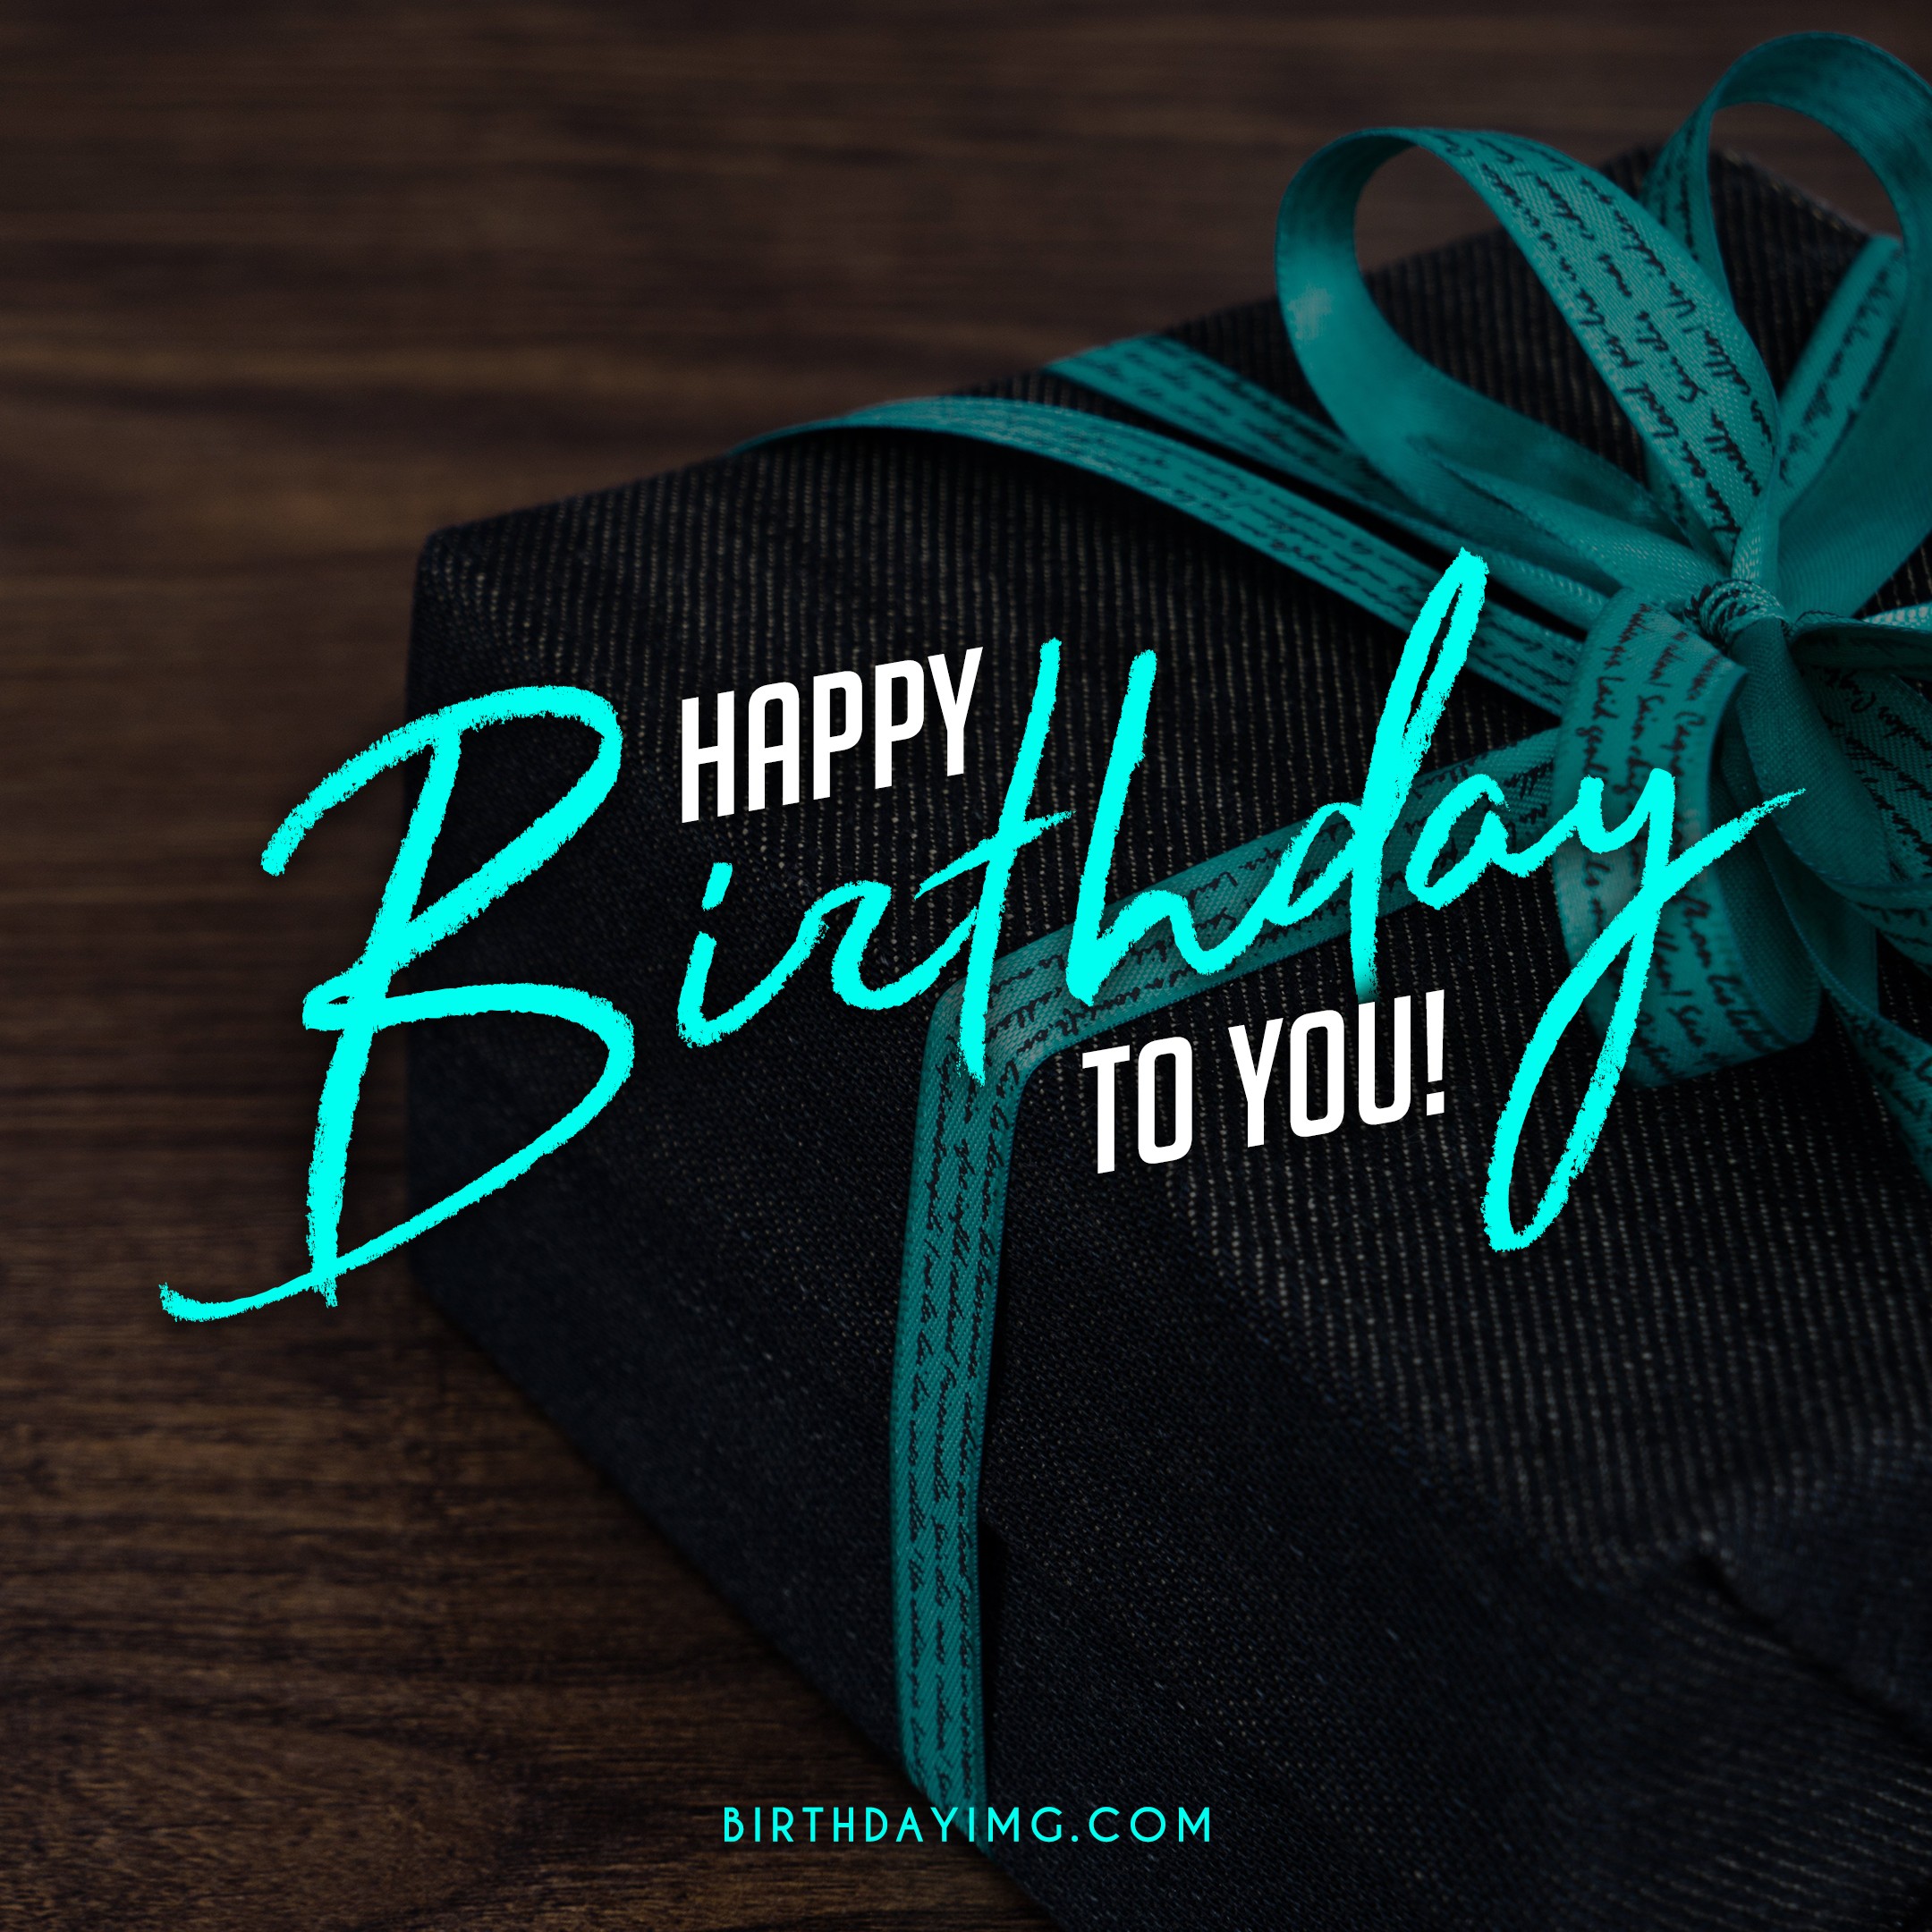 masculine birthday backgrounds